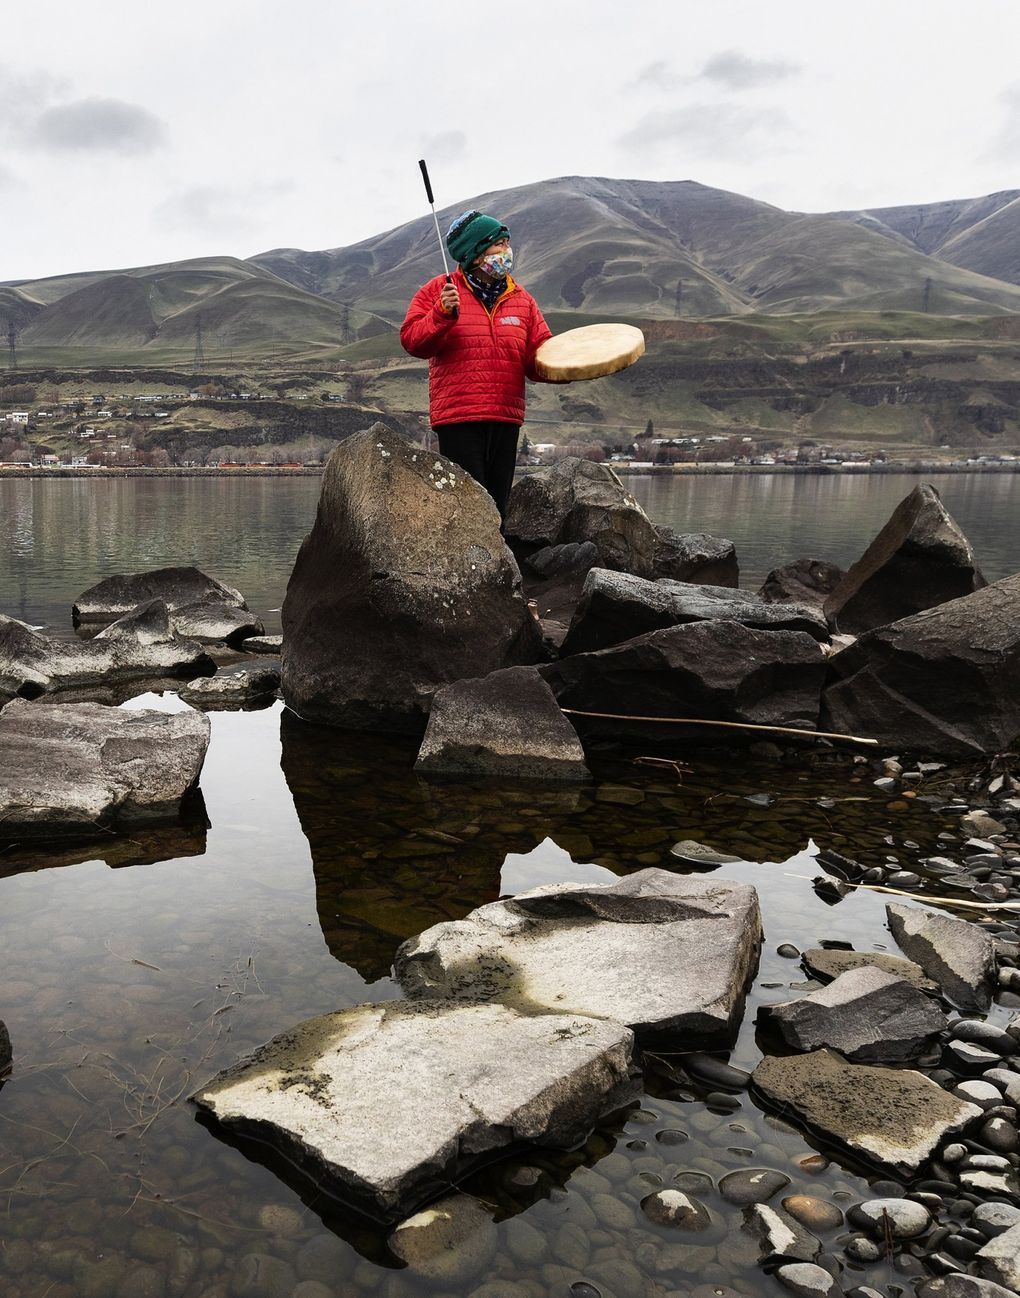 Lana Jack, a Celilo Wyam Indian, offers a prayer and a song for the Columbia River at Celilo Park in Oregon on Dec. 29. The park is the former site of Celilo Falls, which was flooded by The Dalles Dam. (Andy Bao)